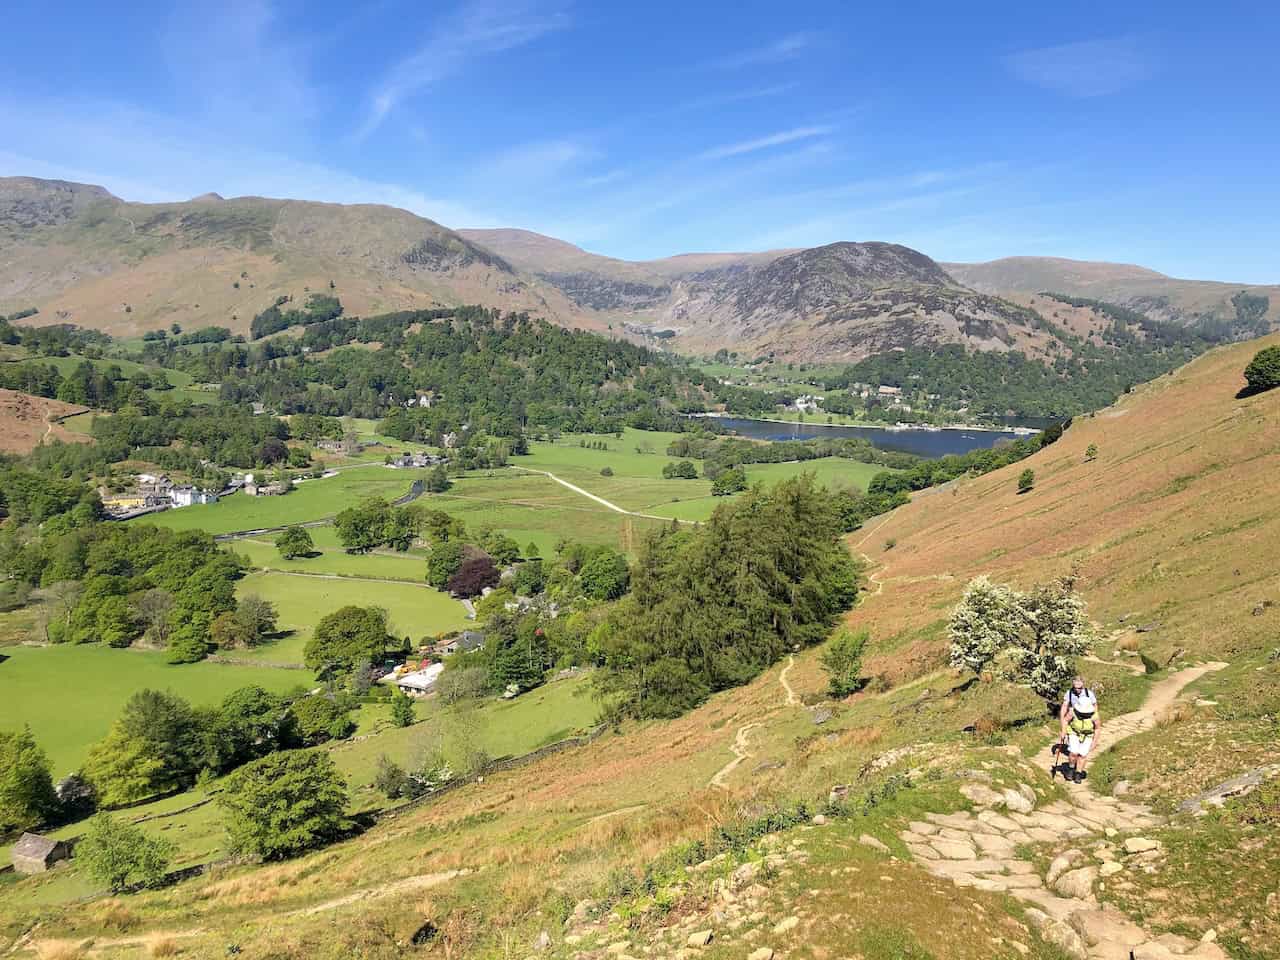 The view north-west towards Glenridding and the southern tip of Ullswater.